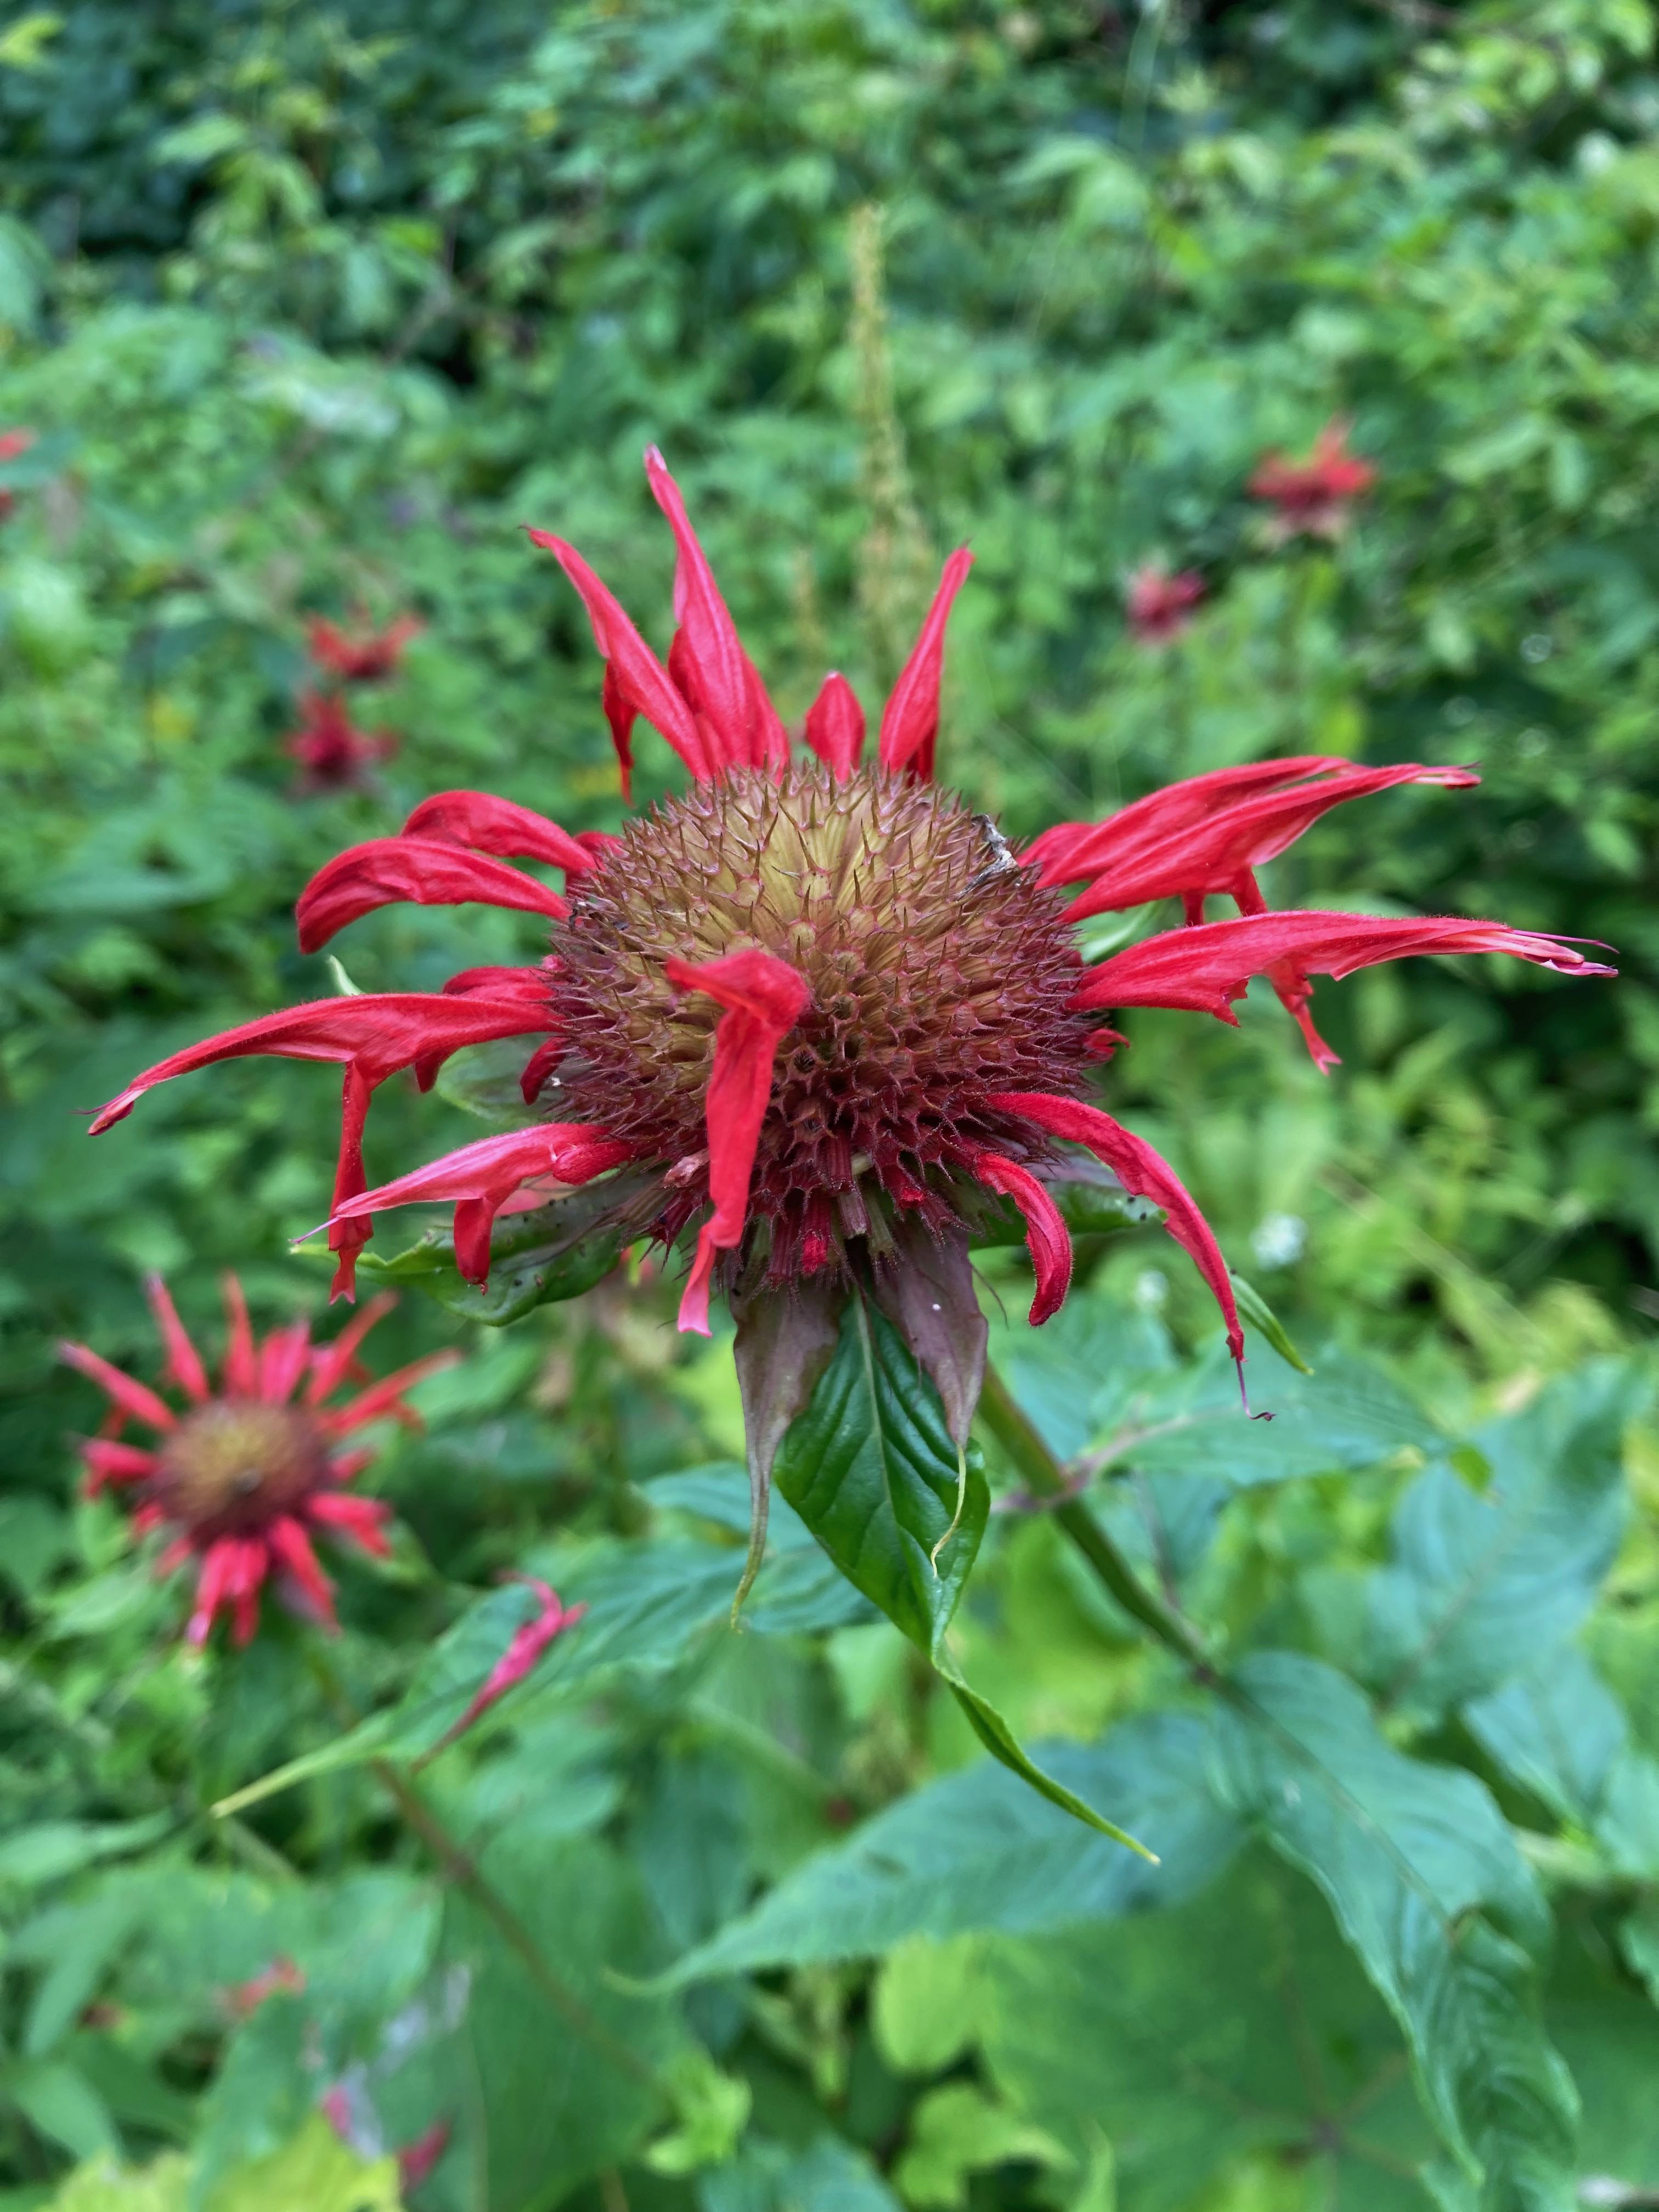 The Scientific Name is Monarda didyma. You will likely hear them called Bee-balm, Oswego Tea, Scarlet Beebalm, Red Bergamot. This picture shows the The narrow-lipped scarlet flowers face outward from the flower head. Bracts below the inflorescence also have a reddish color. of Monarda didyma